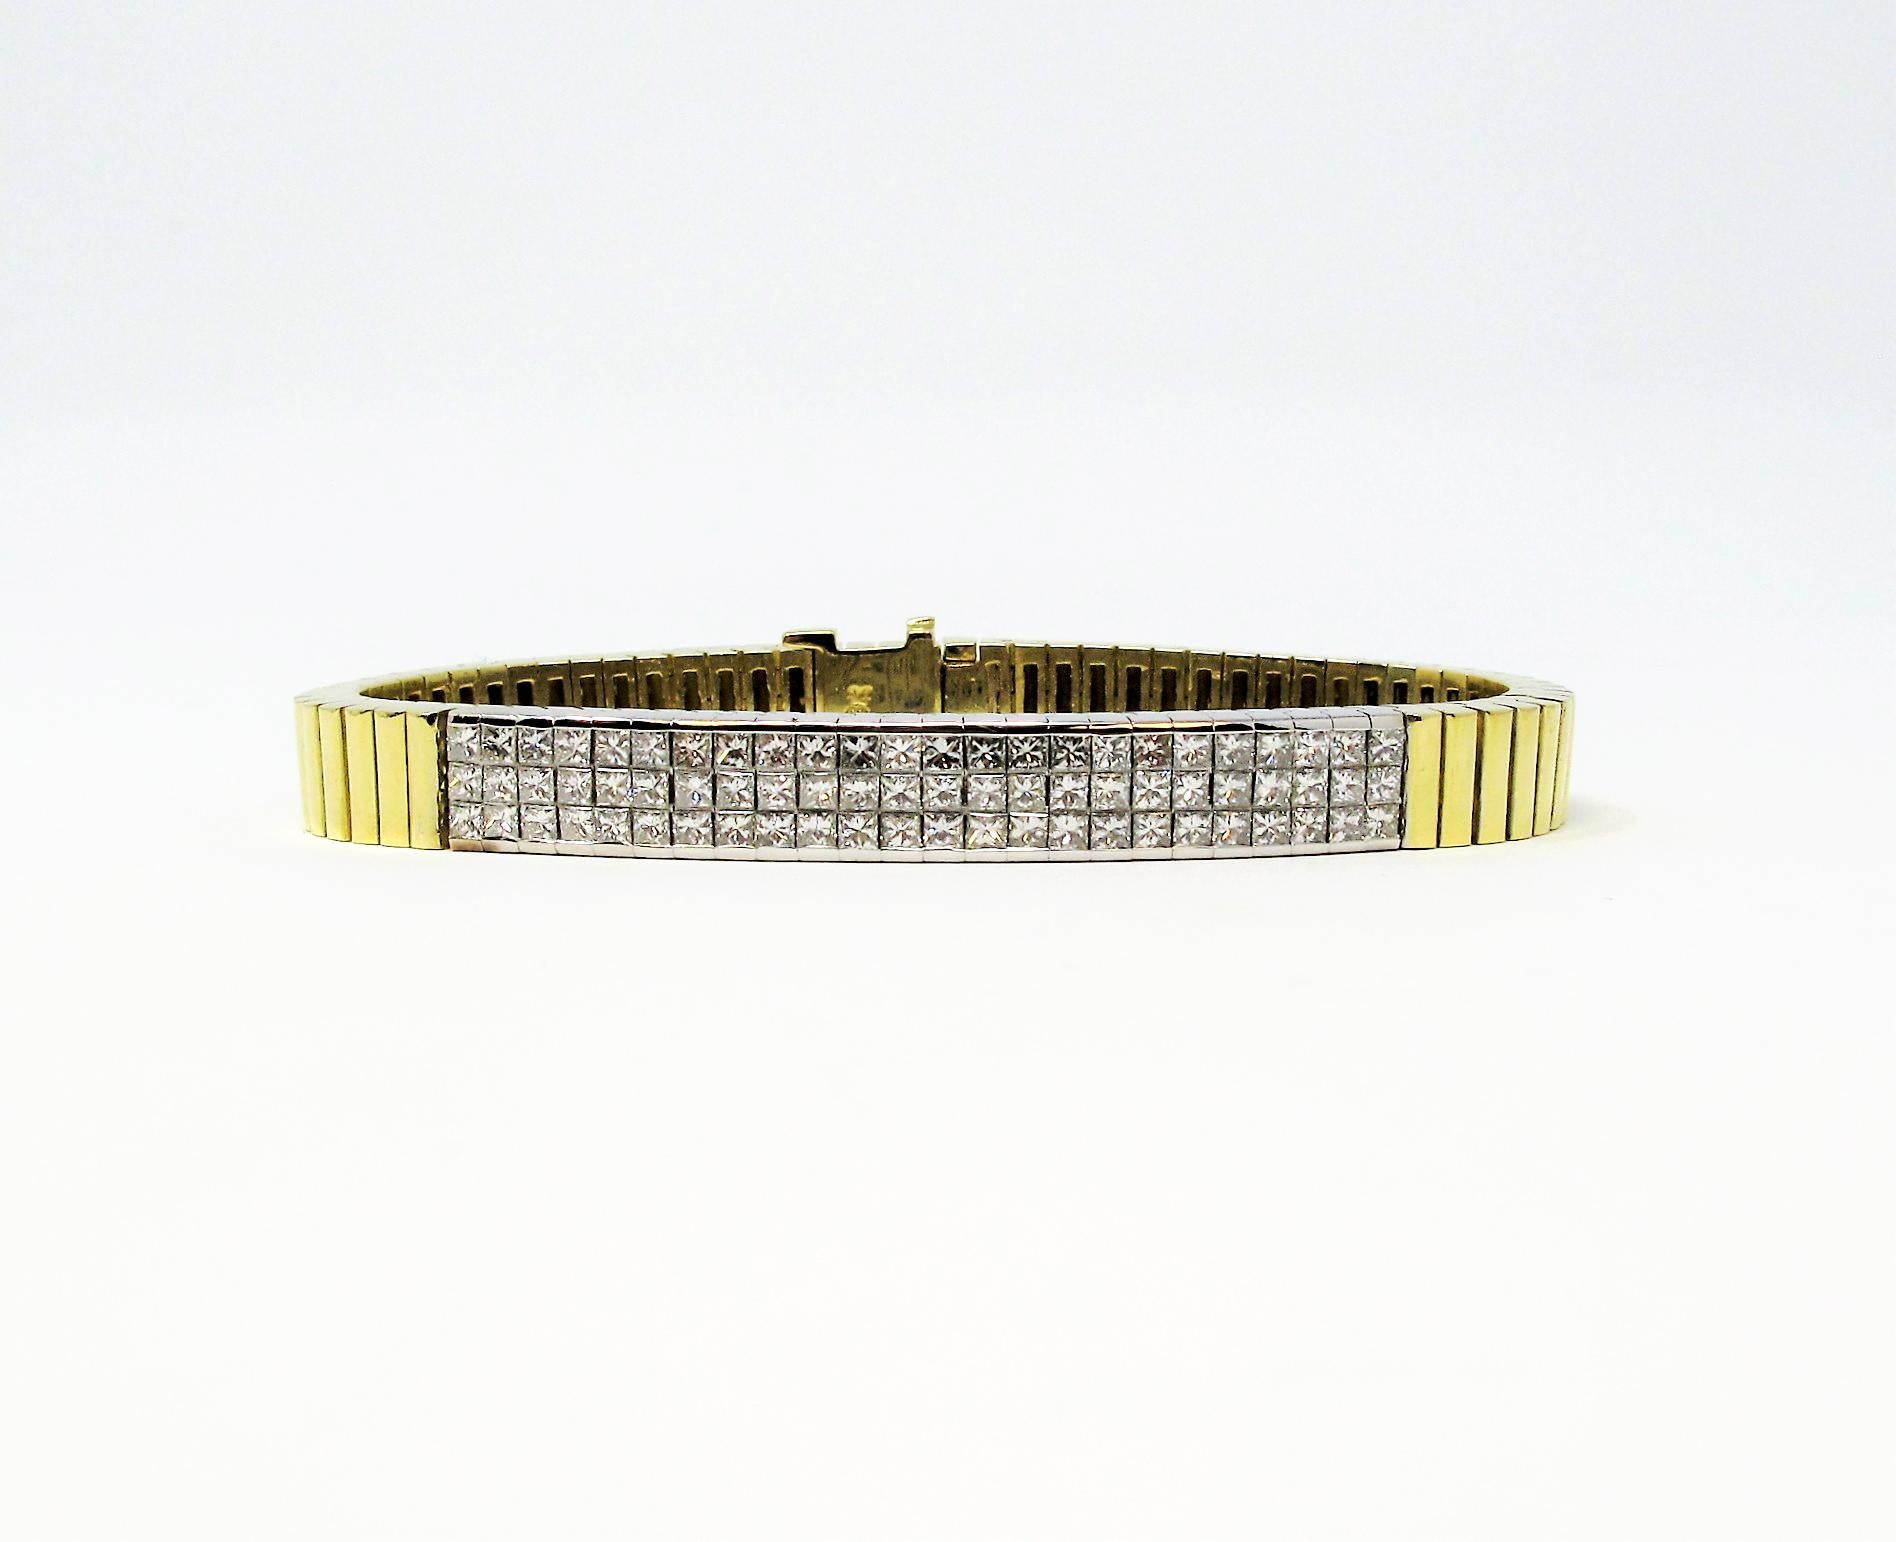 This incredible two-tone princess cut diamond link bracelet will line your wrist in pure elegance. The sleek design of this gorgeous piece can be dressed up or down, and the multi-tone gold arrangement works well with a variety of different looks.